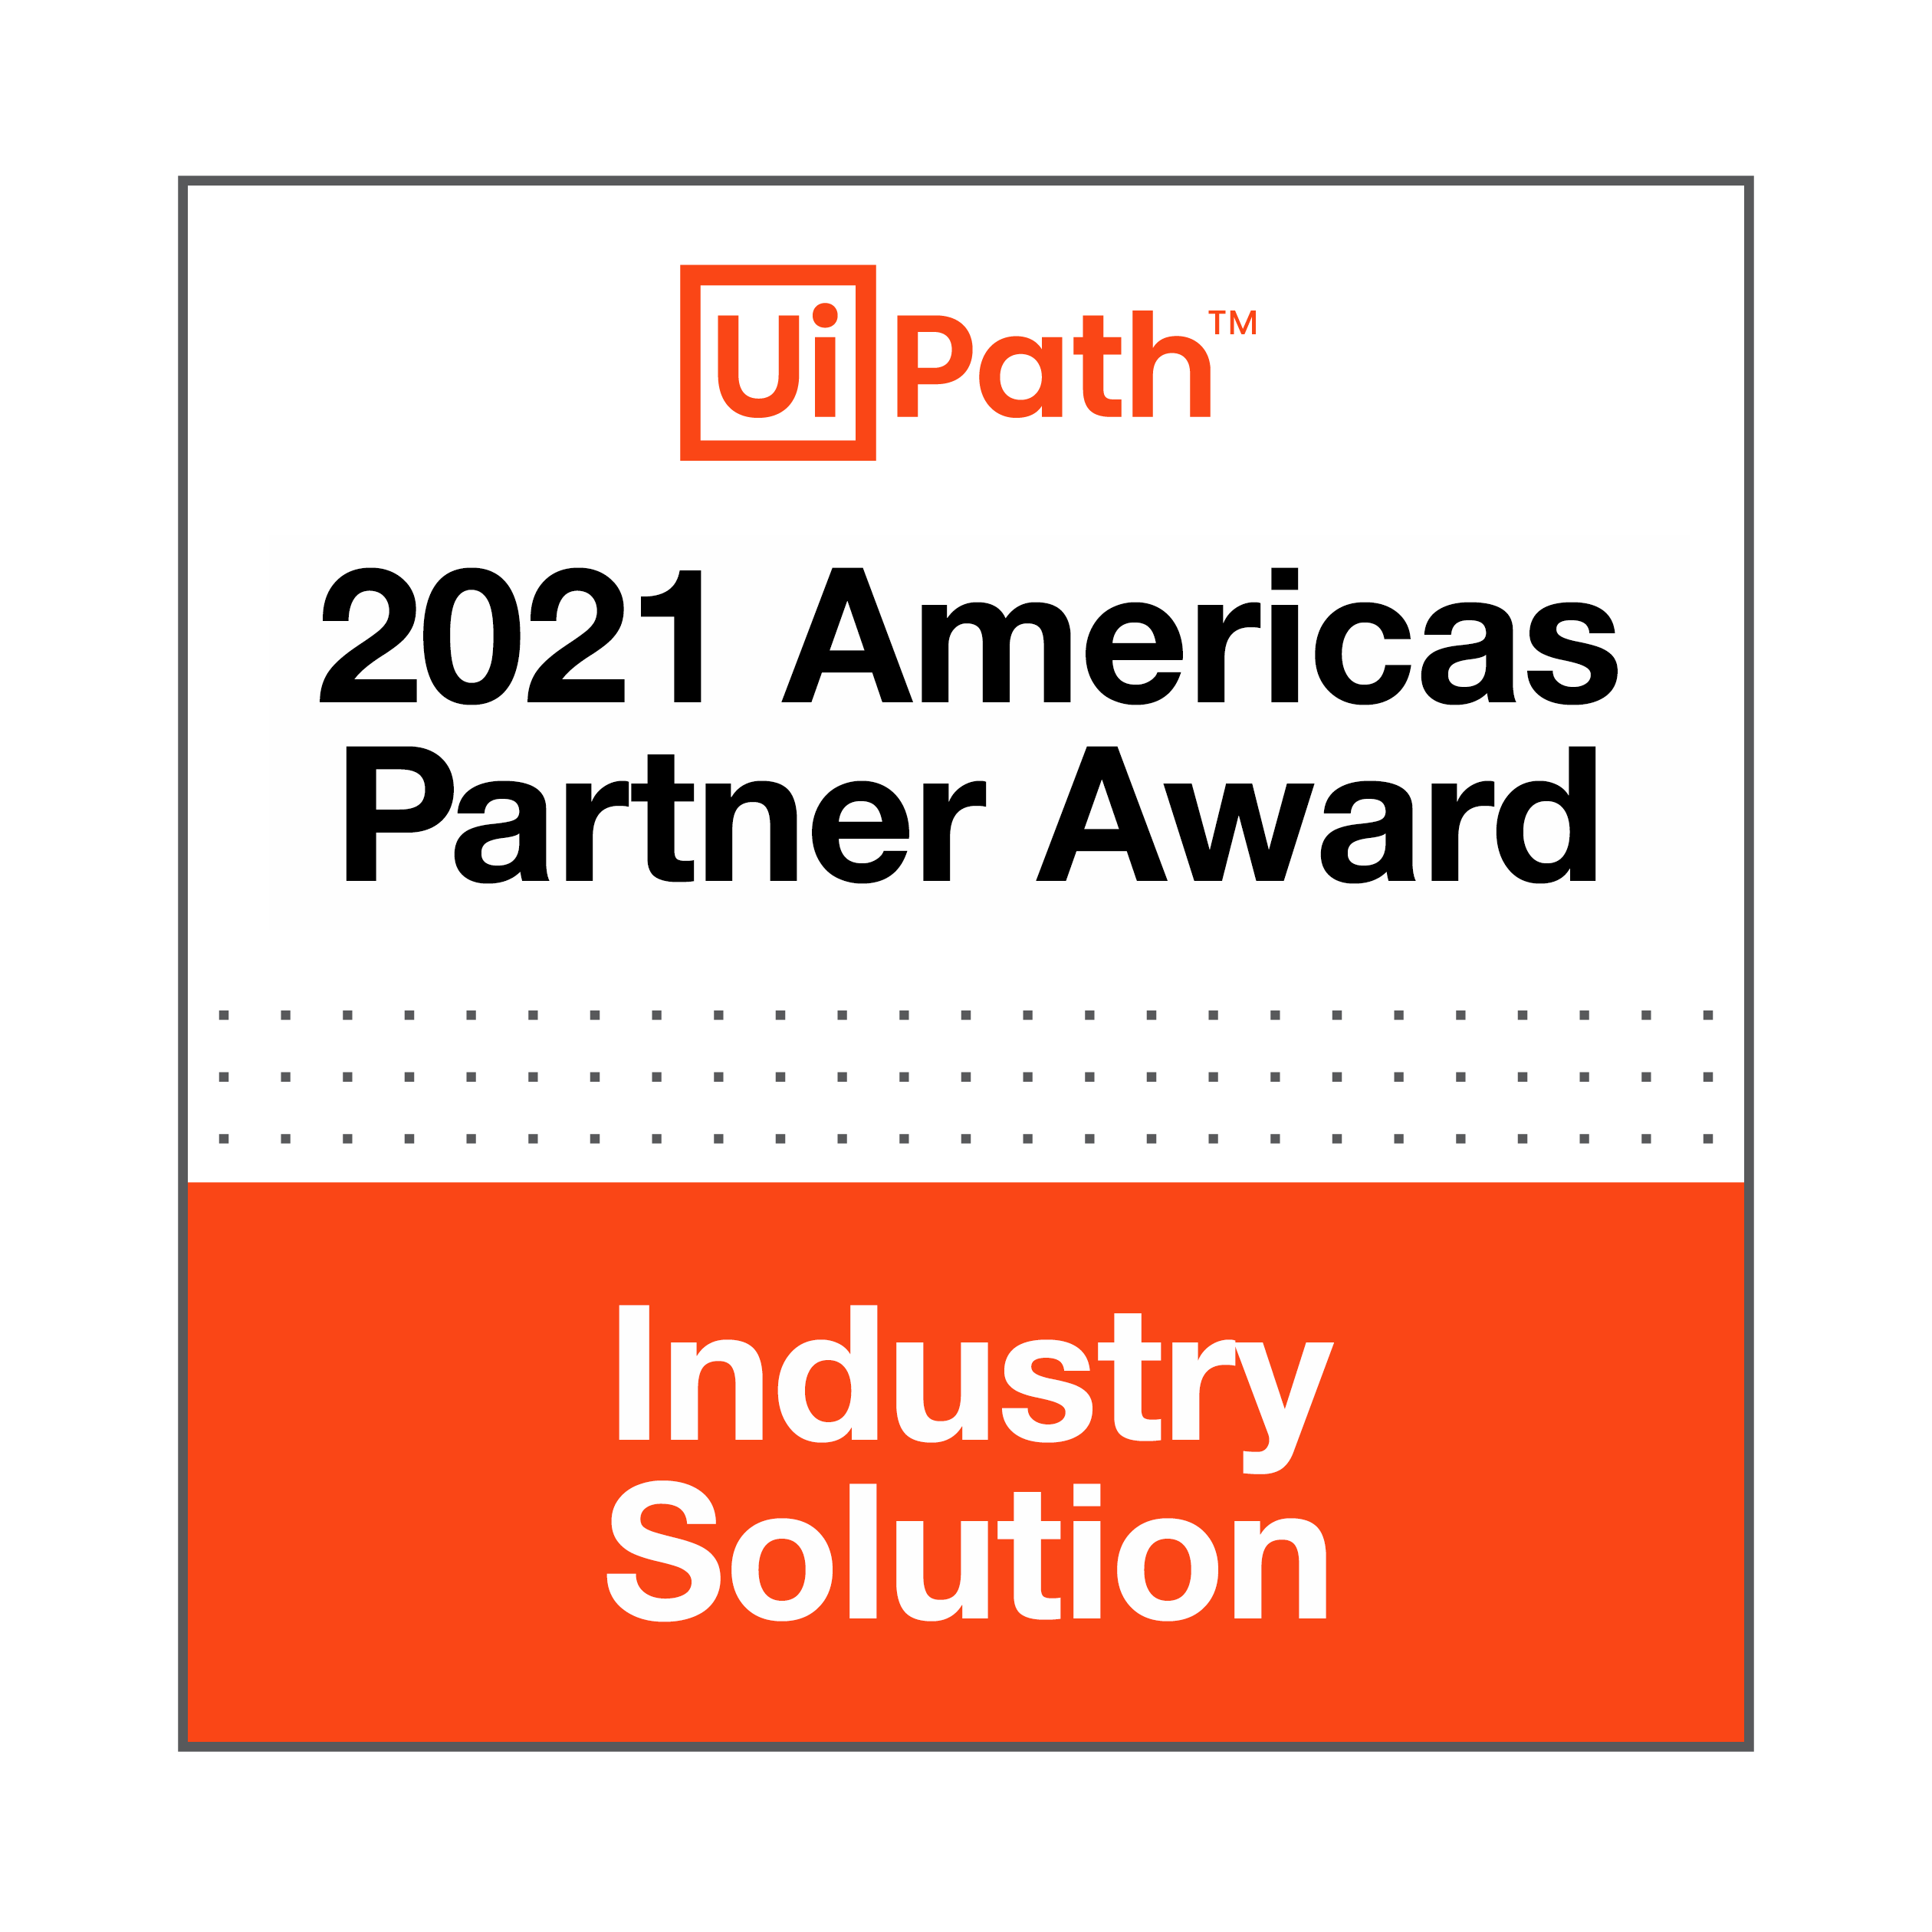 Ui Path 2020 Partner of the Year Americas